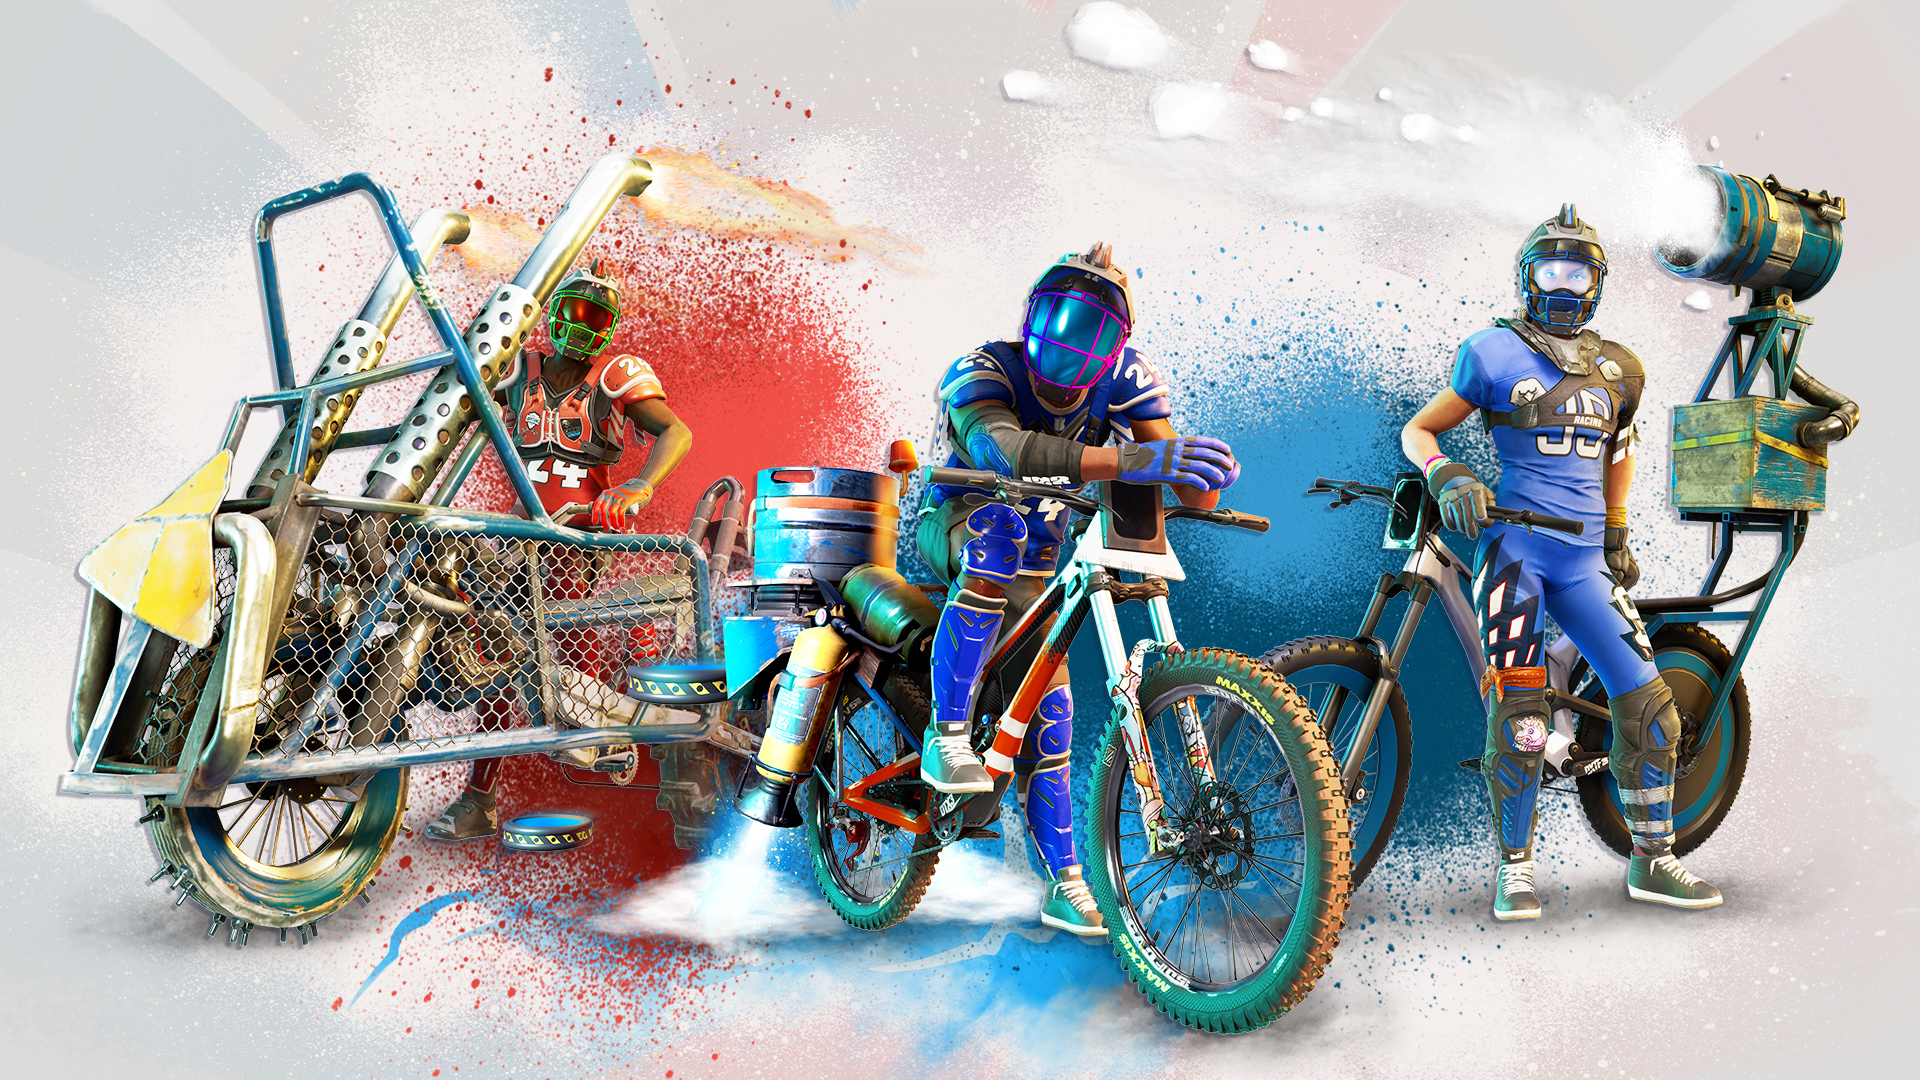 Riders Republic, Shredders, and more join Xbox Free Play Days this weekend  - Neowin